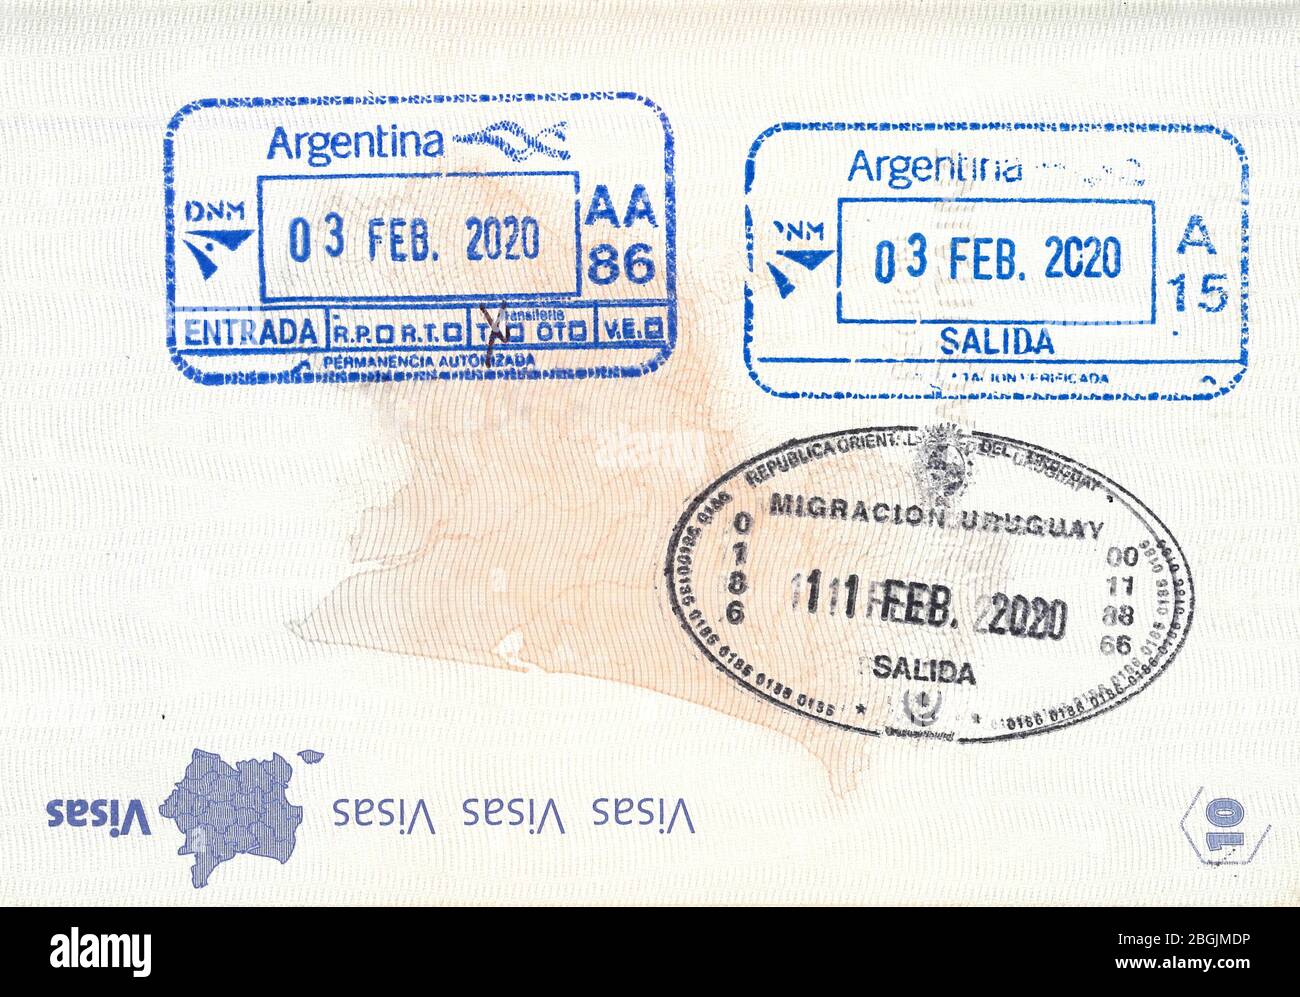 Stamps of Argentina and Uruguay in French passport Stock Photo